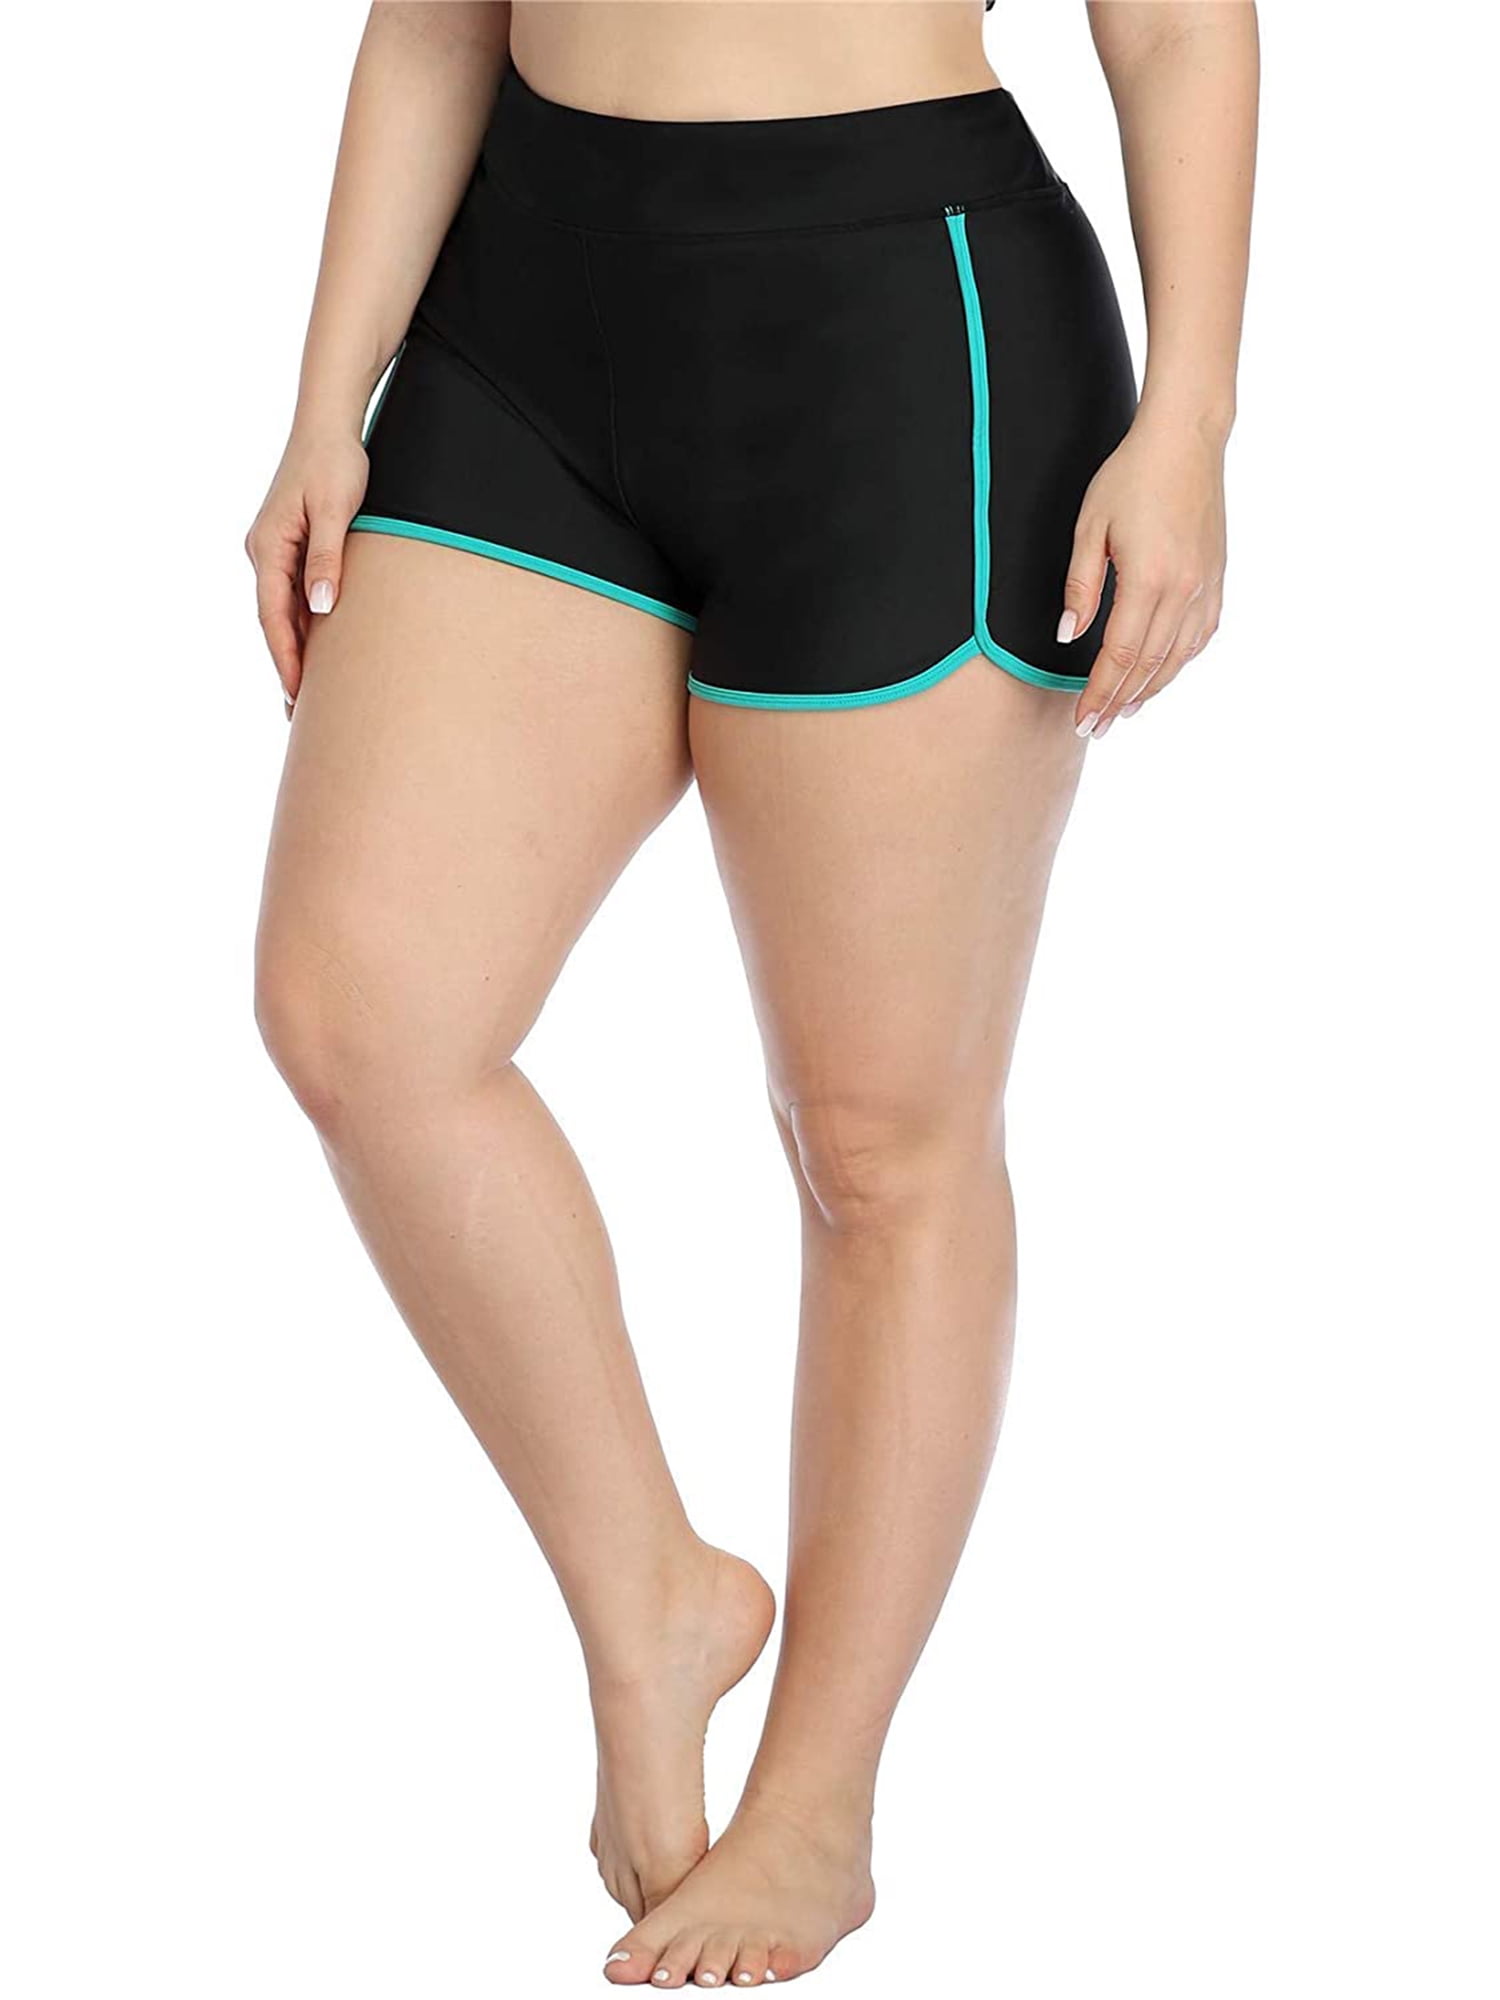 Swimsuits for All Women's Plus Size Adjustable Swim Shorts, 24 - Navy